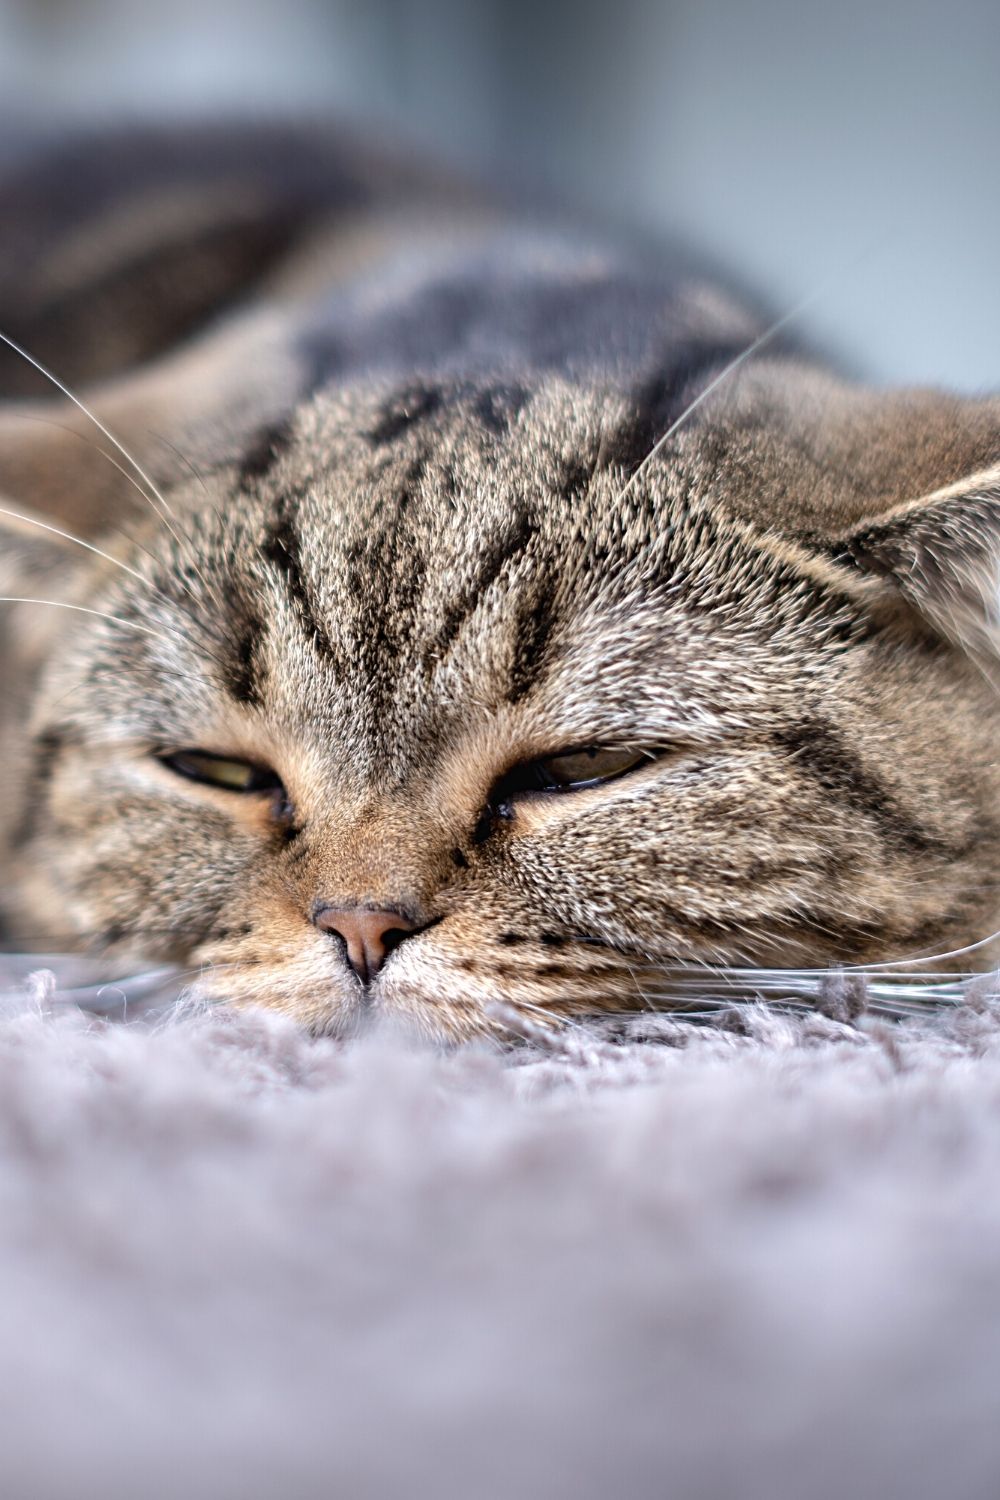 Cats who go for days without water become low in energy, preferring to lay in a corner